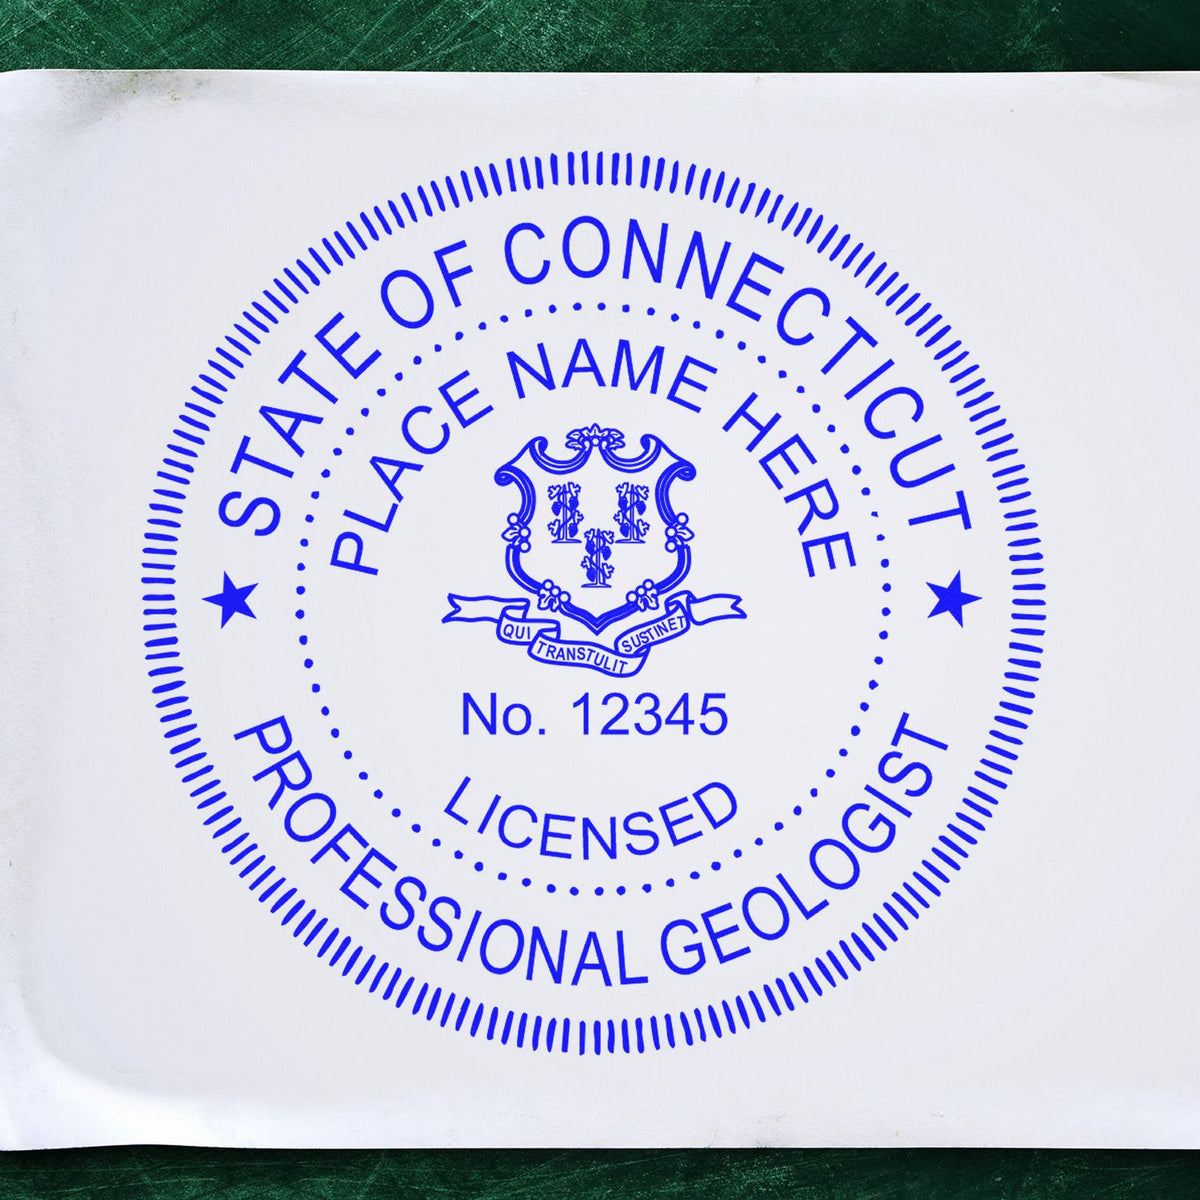 An alternative view of the Connecticut Professional Geologist Seal Stamp stamped on a sheet of paper showing the image in use